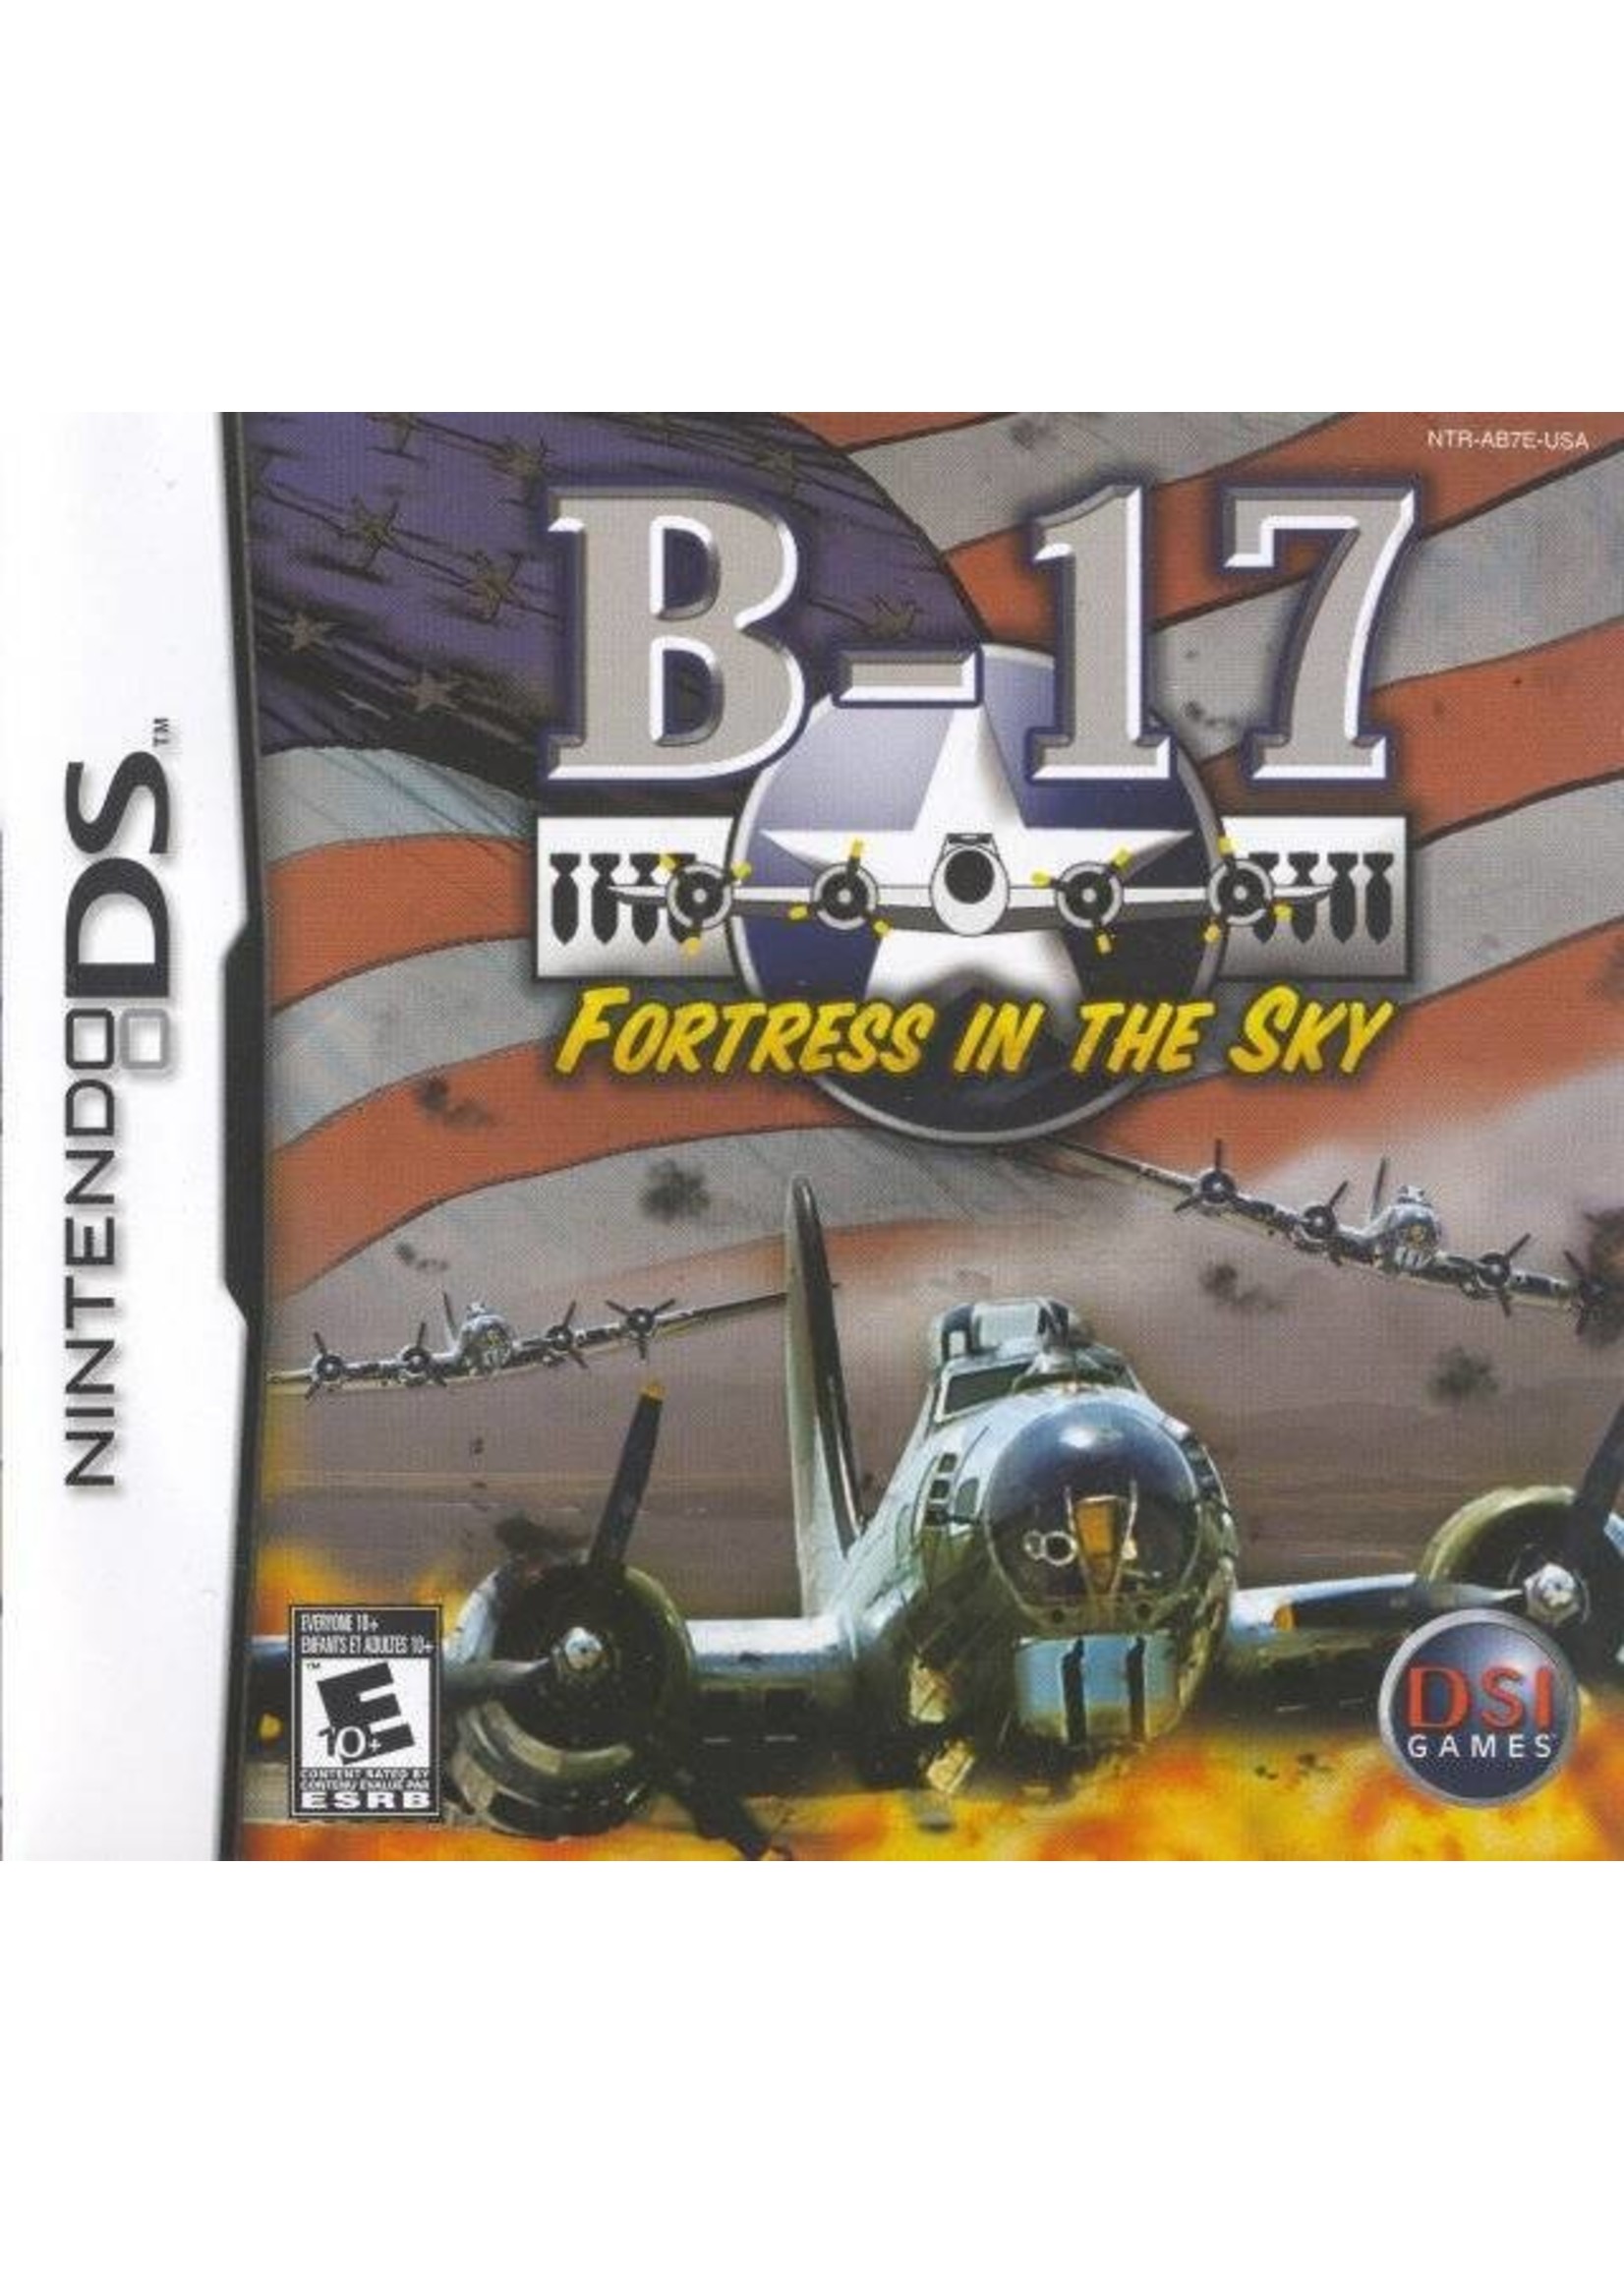 Nintendo DS B-17 Fortress in the Sky - Cart Only